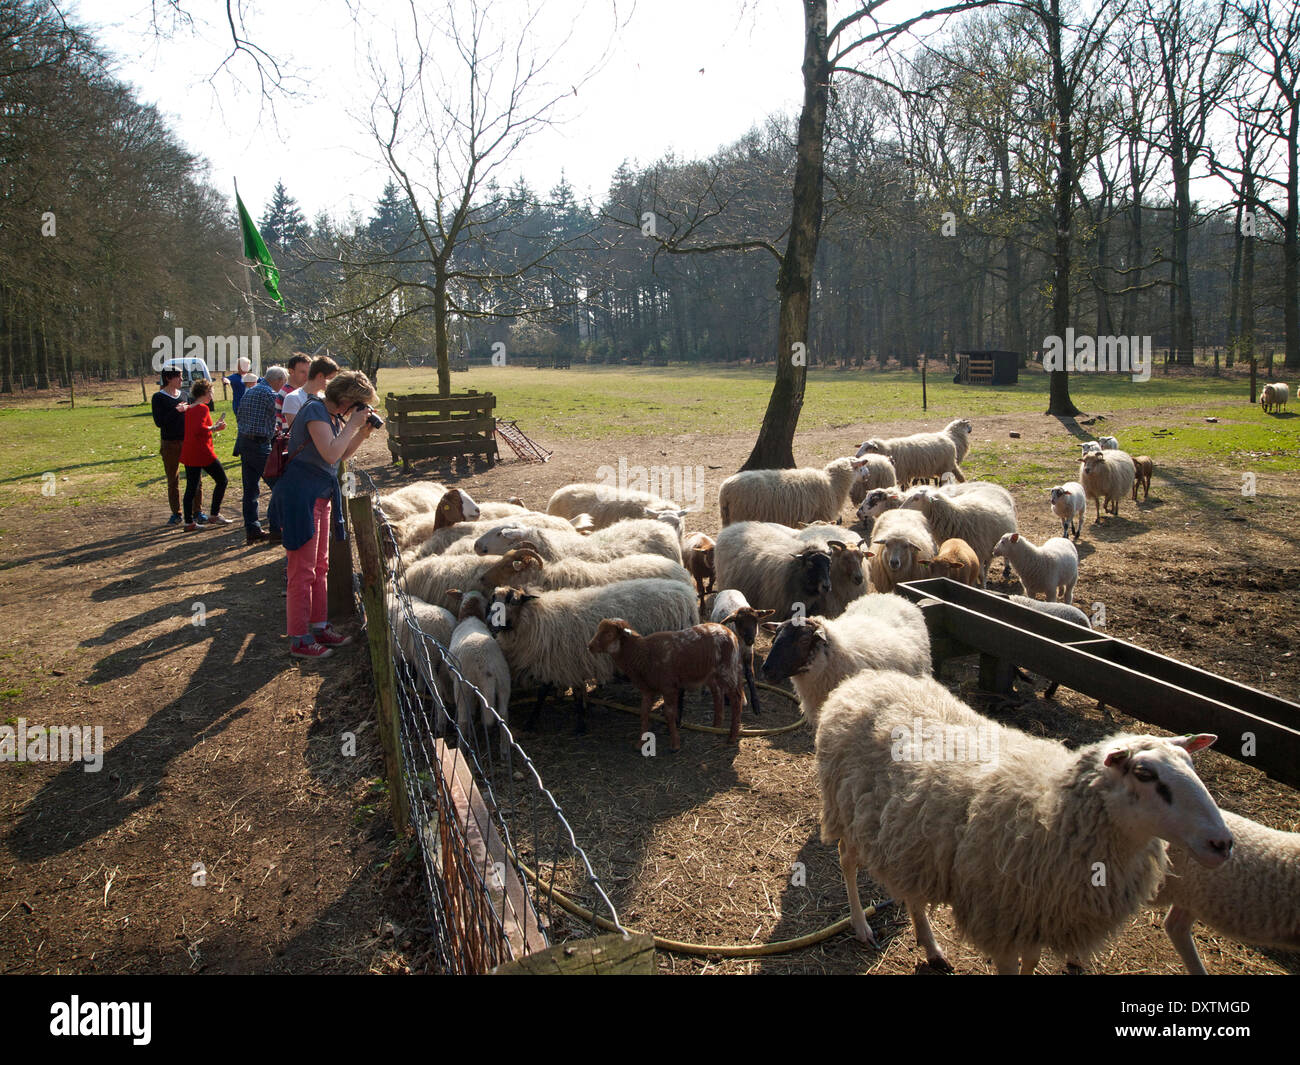 Herd of sheep with people looking and taking pictures in Nijverdal, Overijssel, the Netherlands Stock Photo